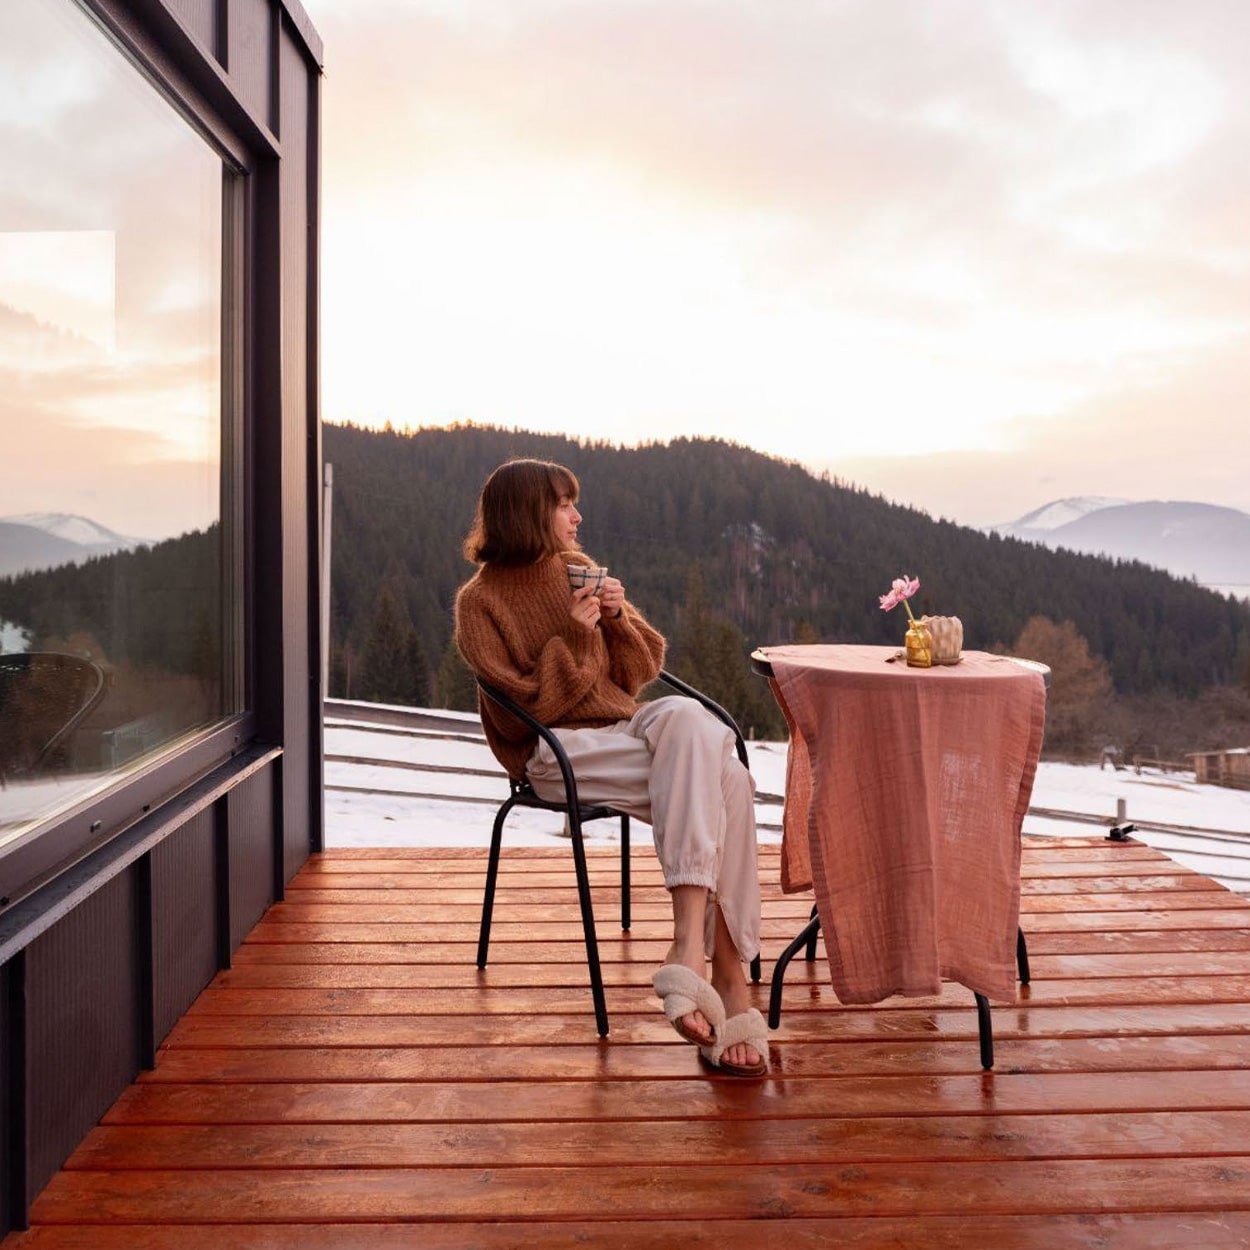 A person sits on a chair on a wooden terrace, wearing a brown sweater and white pants, holding a mug. The terrace overlooks a scenic mountain landscape at sunset. A small table with a pink tablecloth and a vase with a flower is beside them.